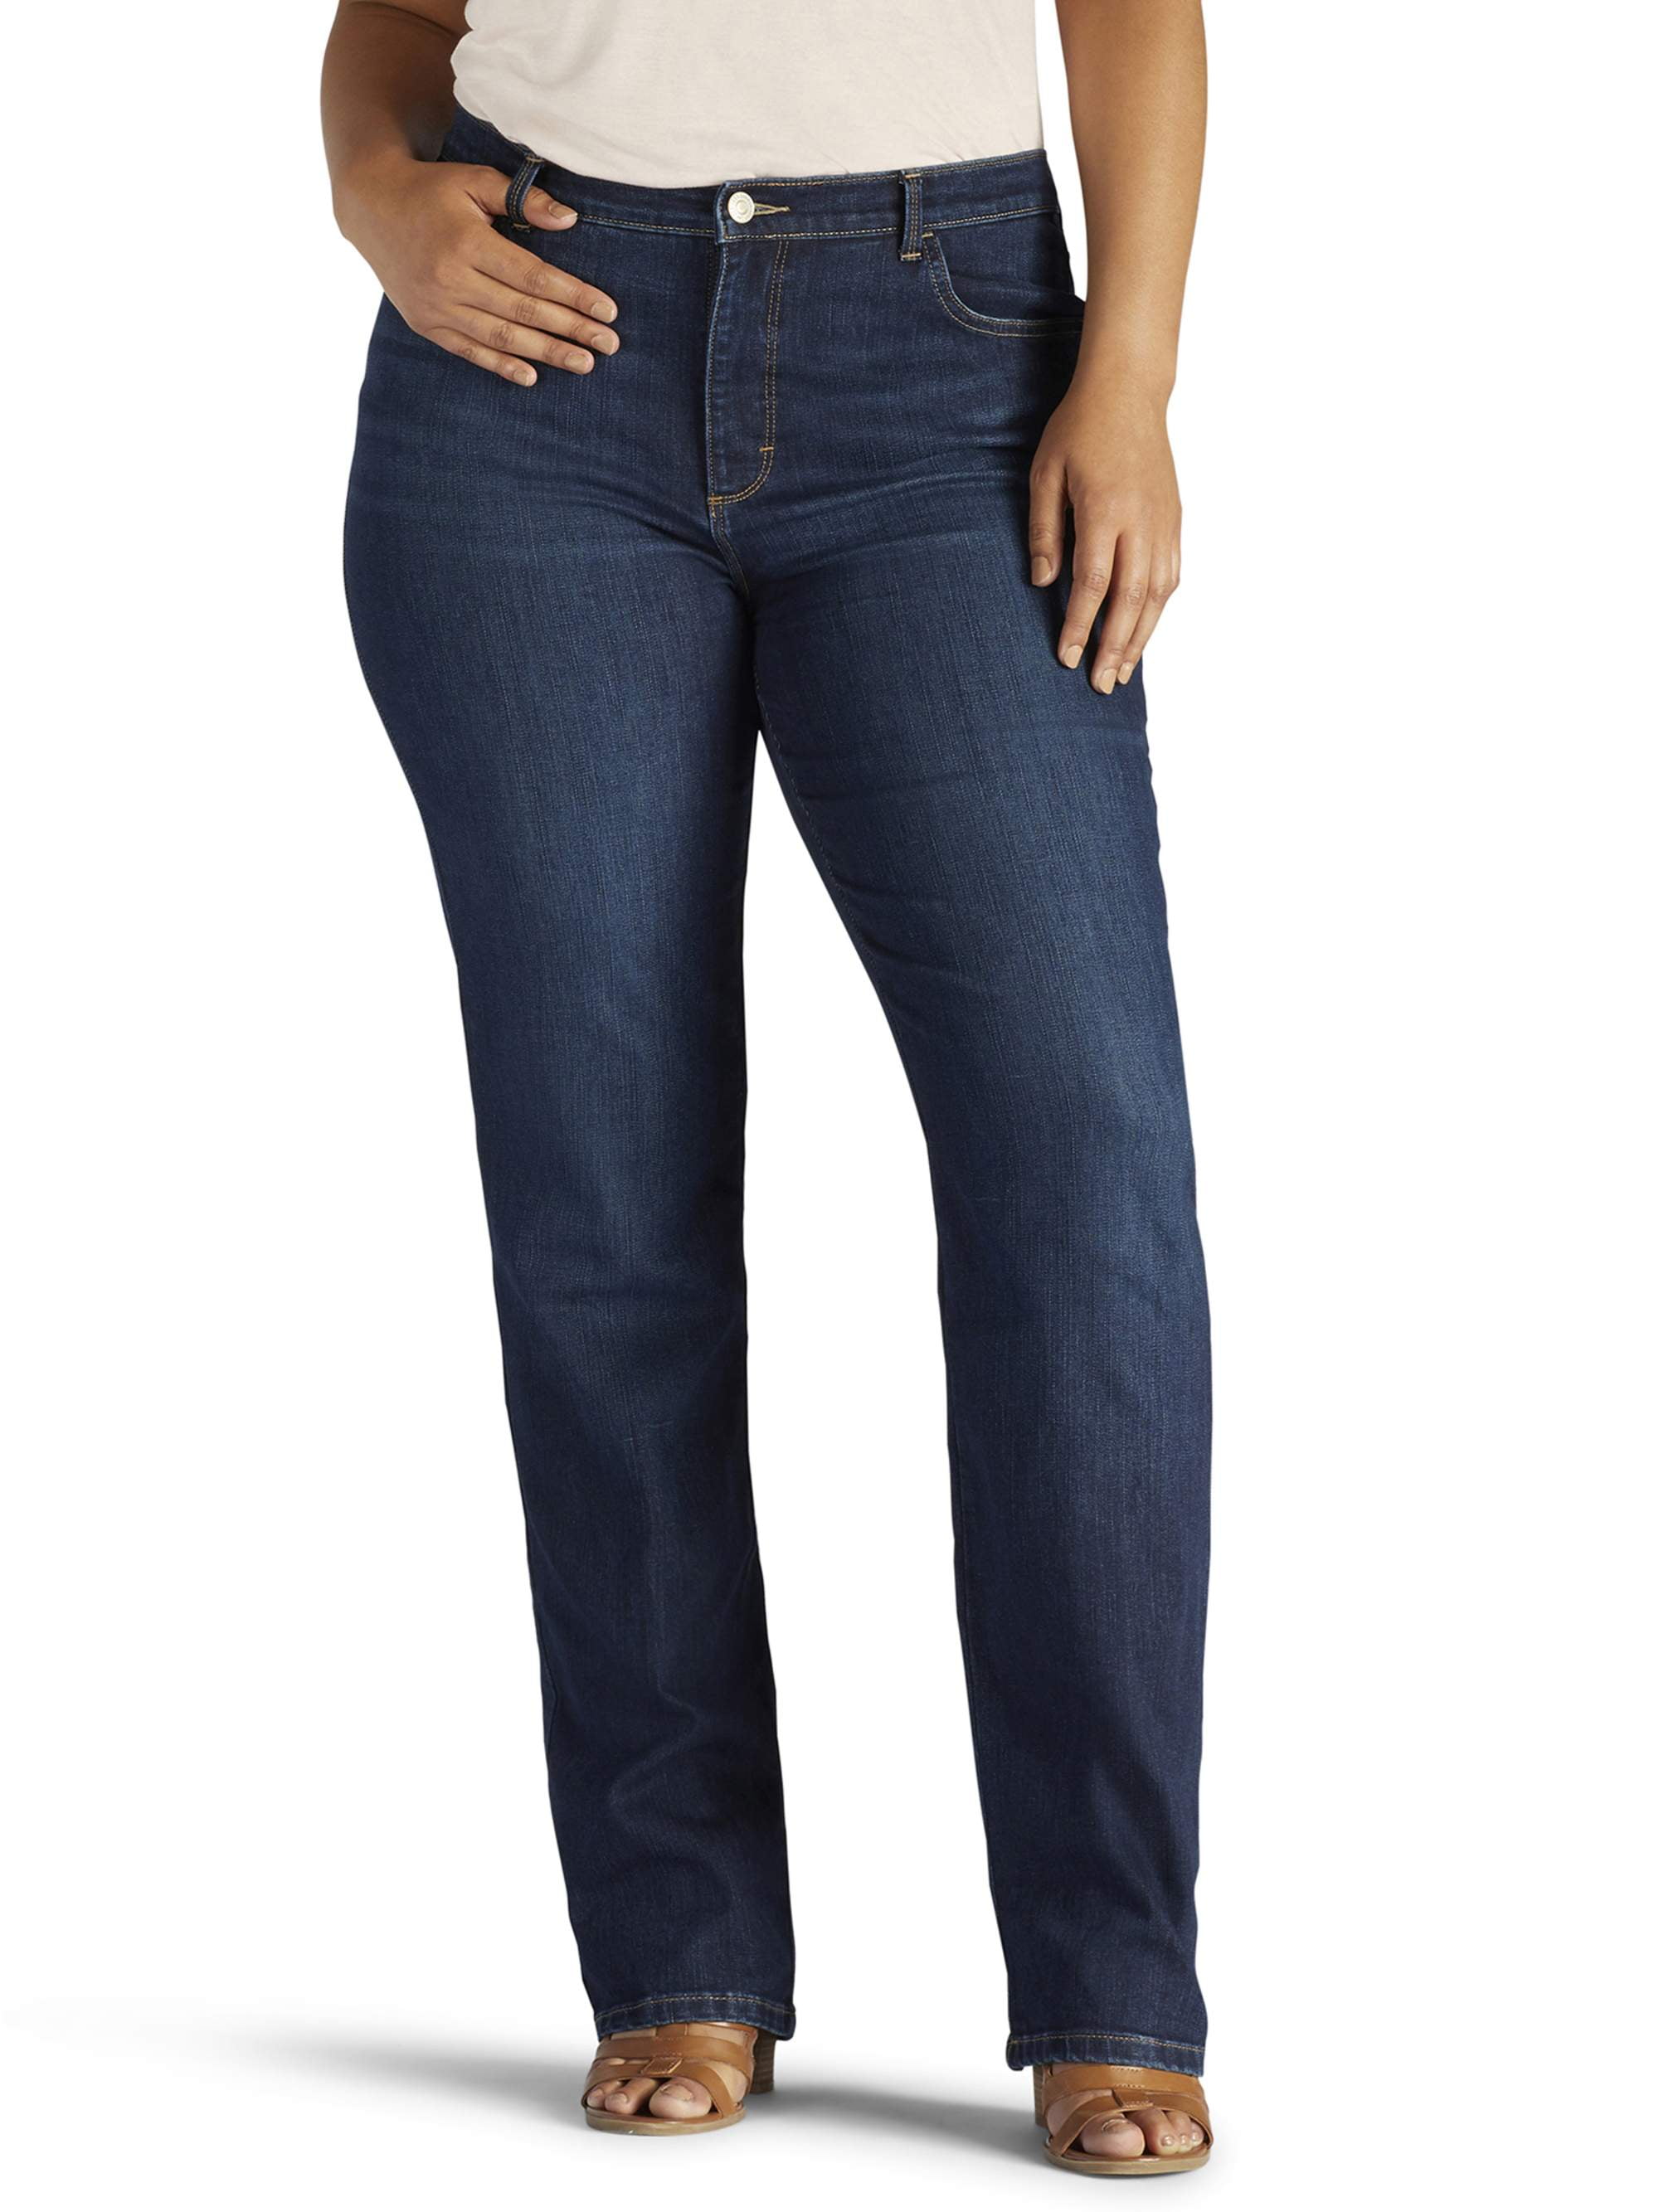 Lee Women's Plus Instantly Slims Relaxed Fit Straight Leg Jean